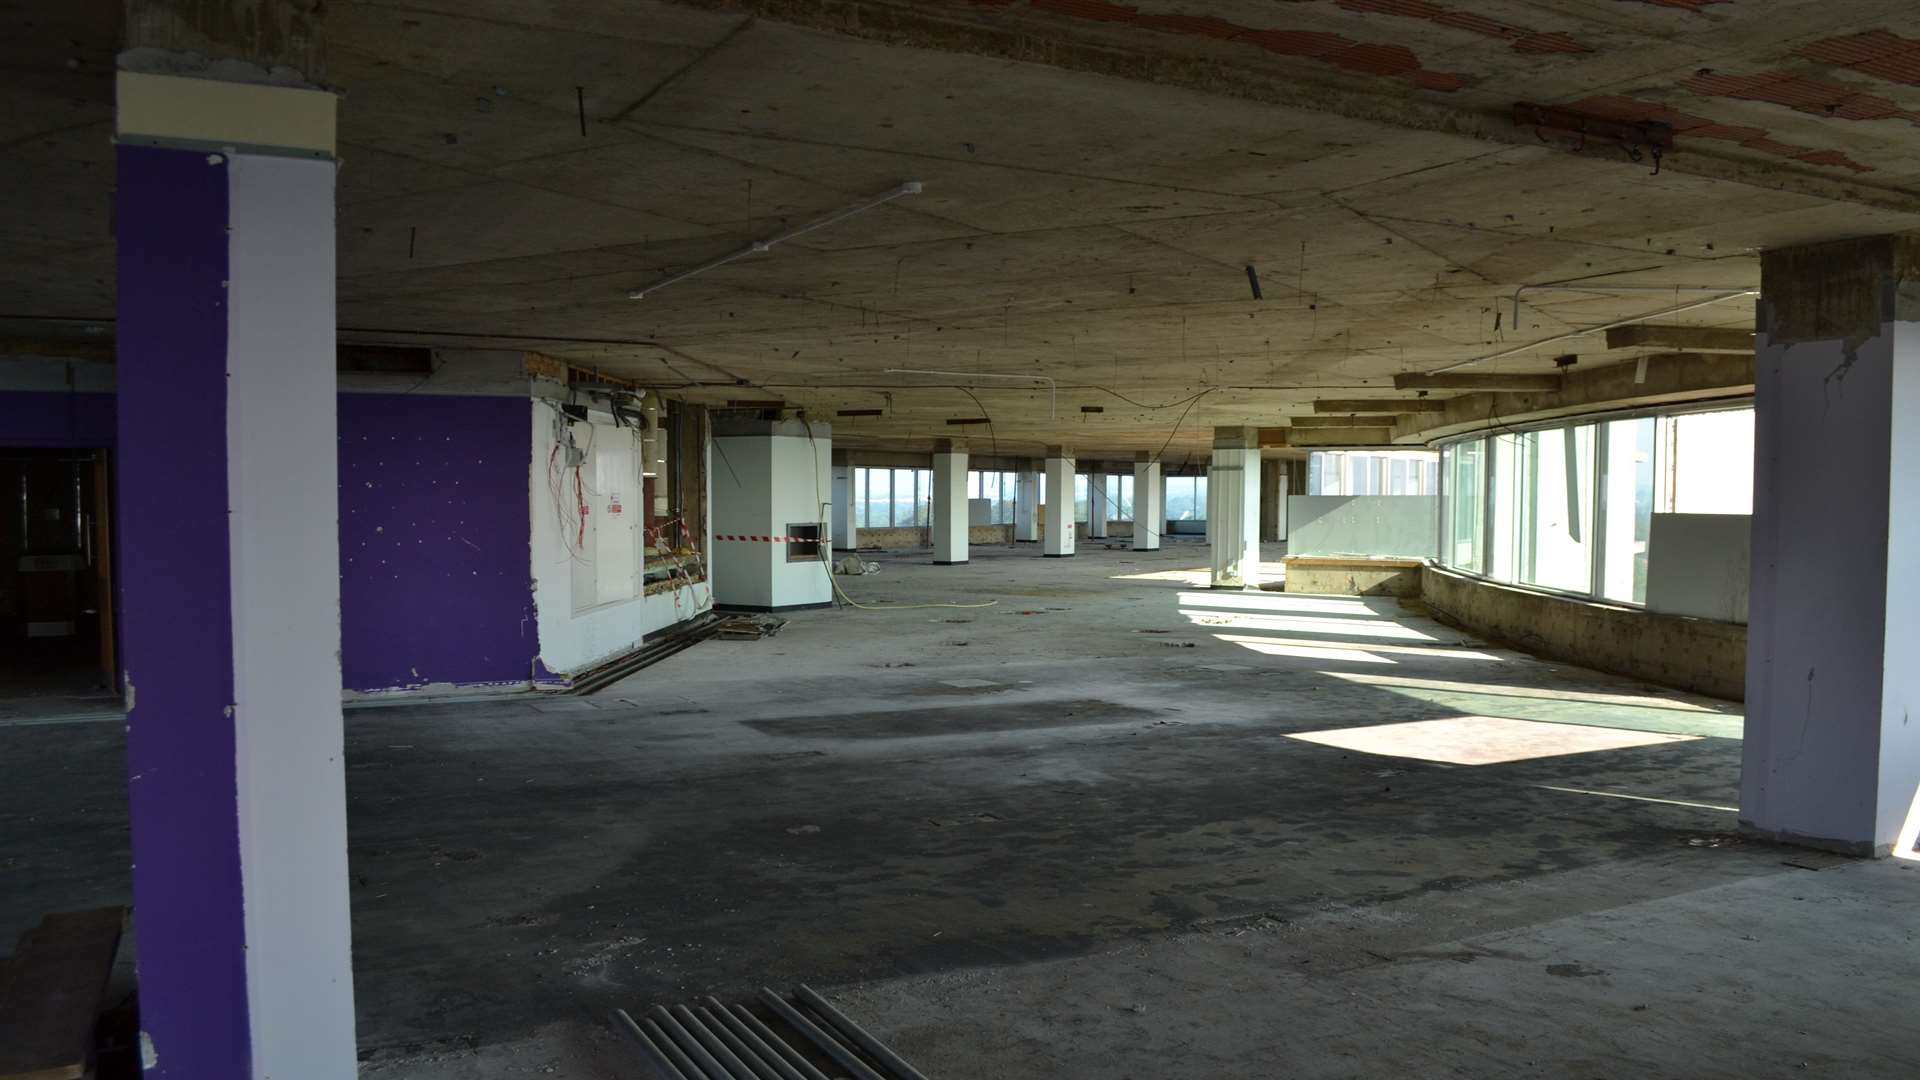 A view inside the stripped interior of the Panorama in September 2013. Courtesy of Steve Salter